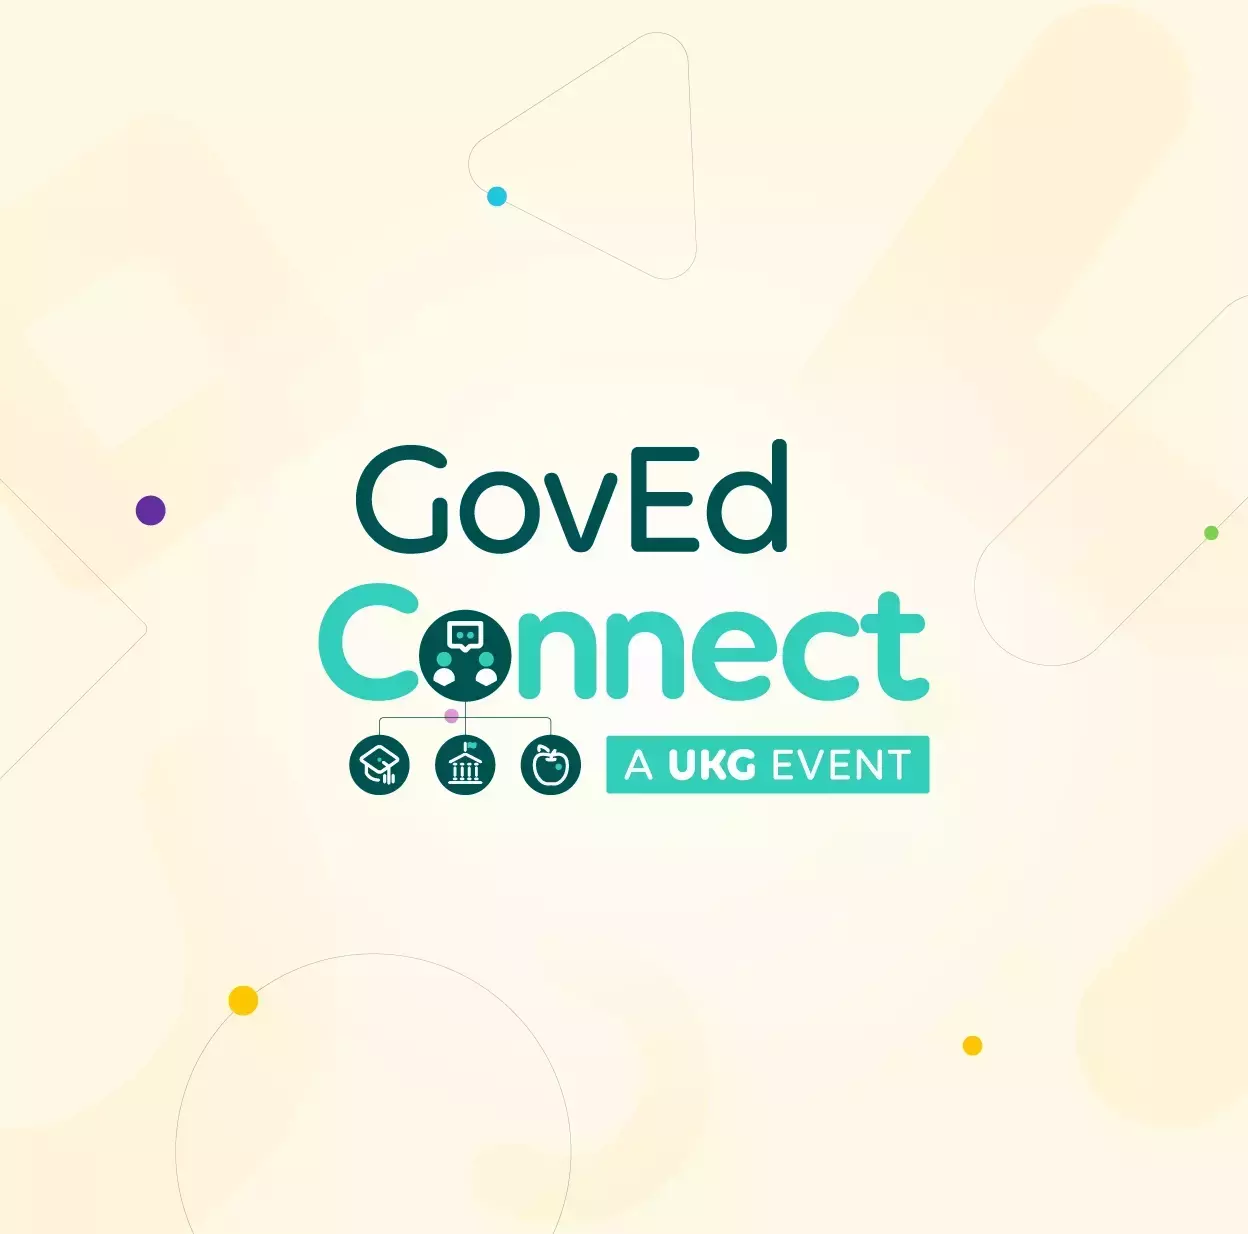 GovEd Connect: A UKG Event